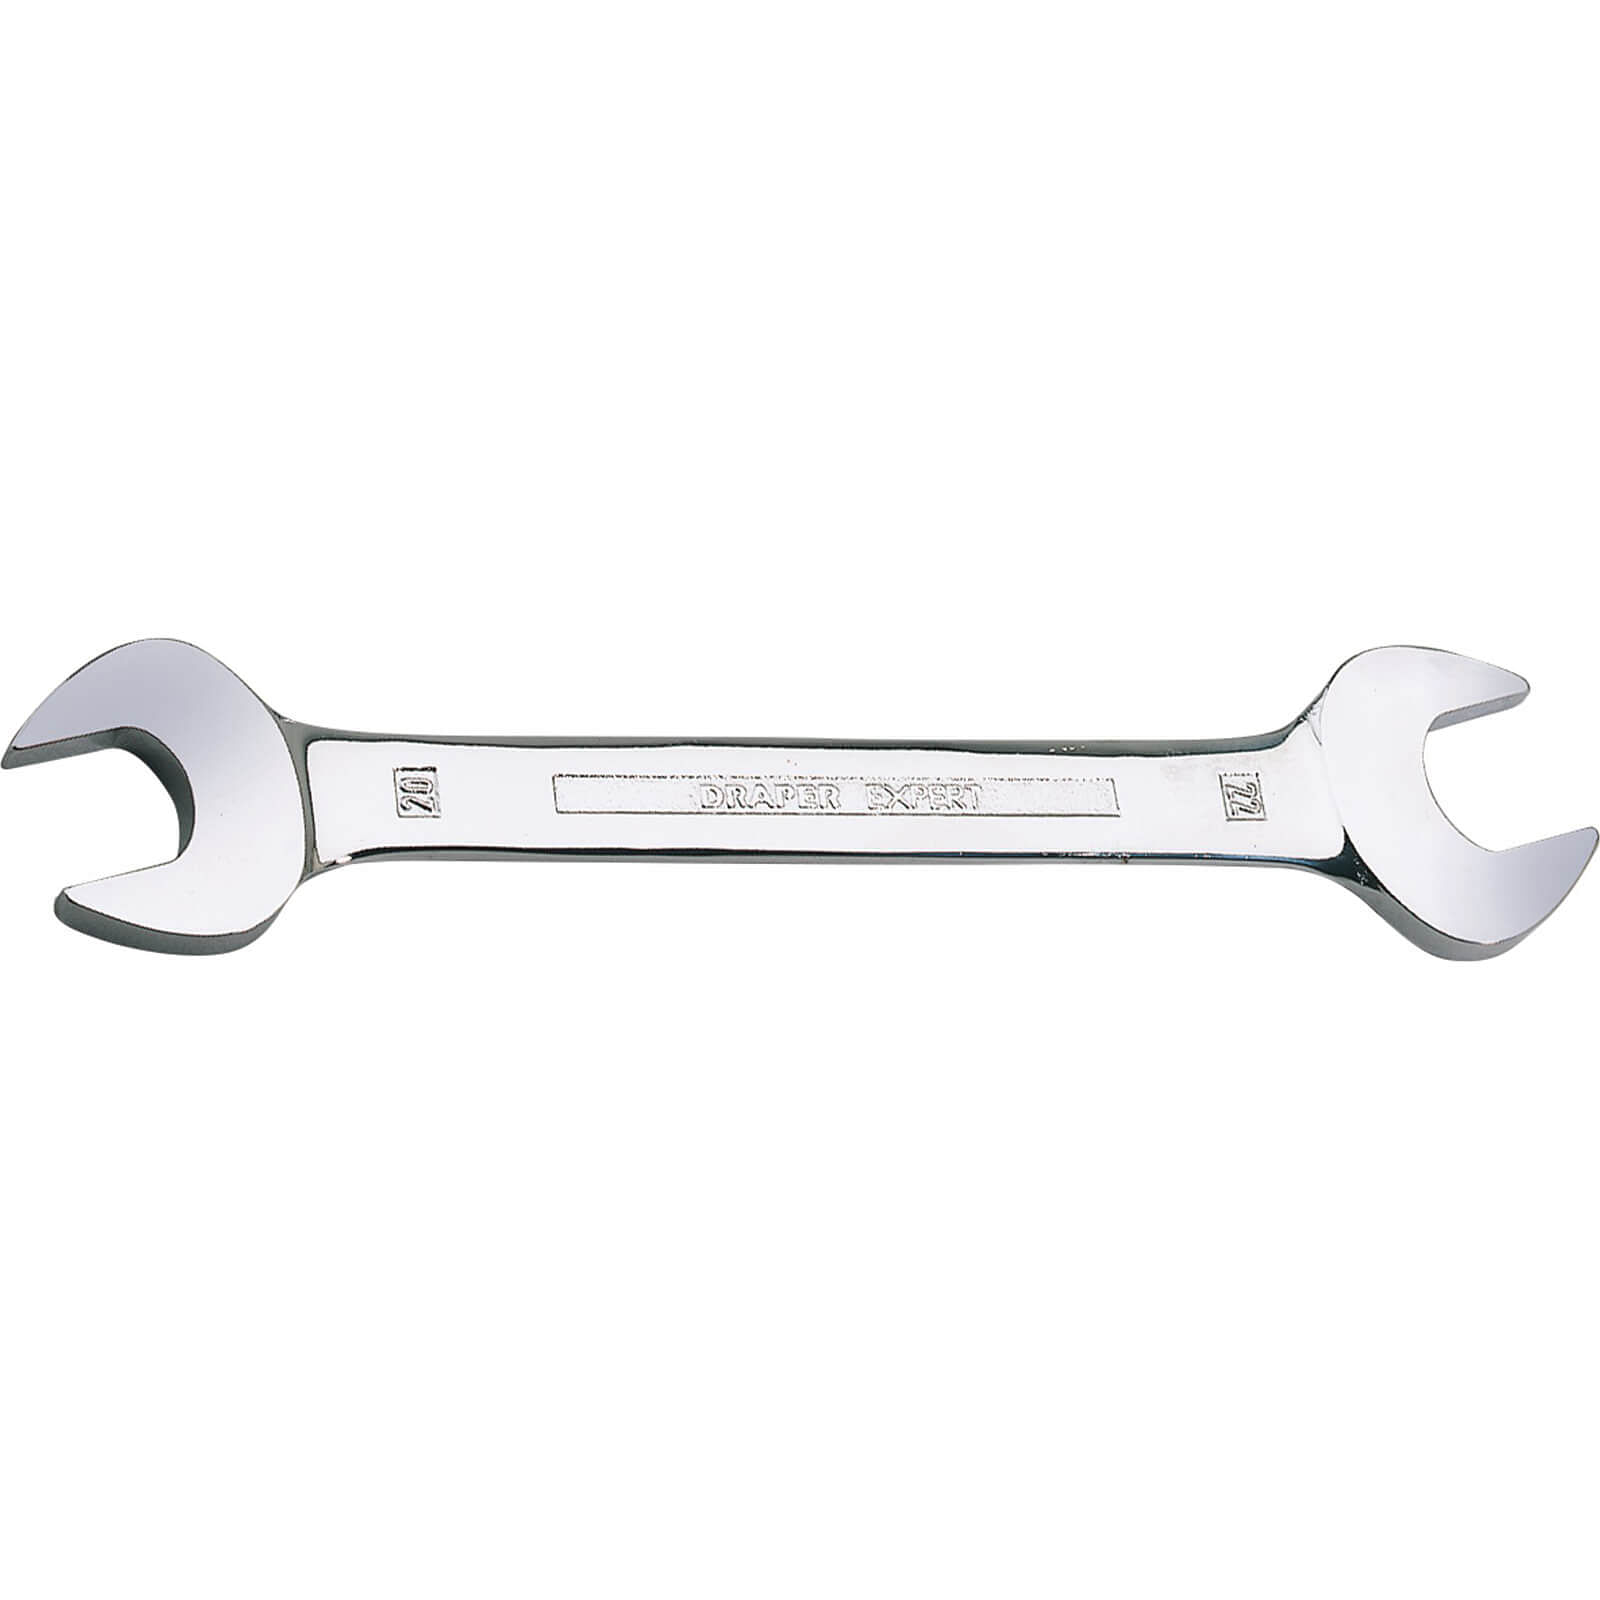 Draper 3mm X 3.5mm Elora Midget Double Open Ended Spanner SPANNERS AND WRENCHES